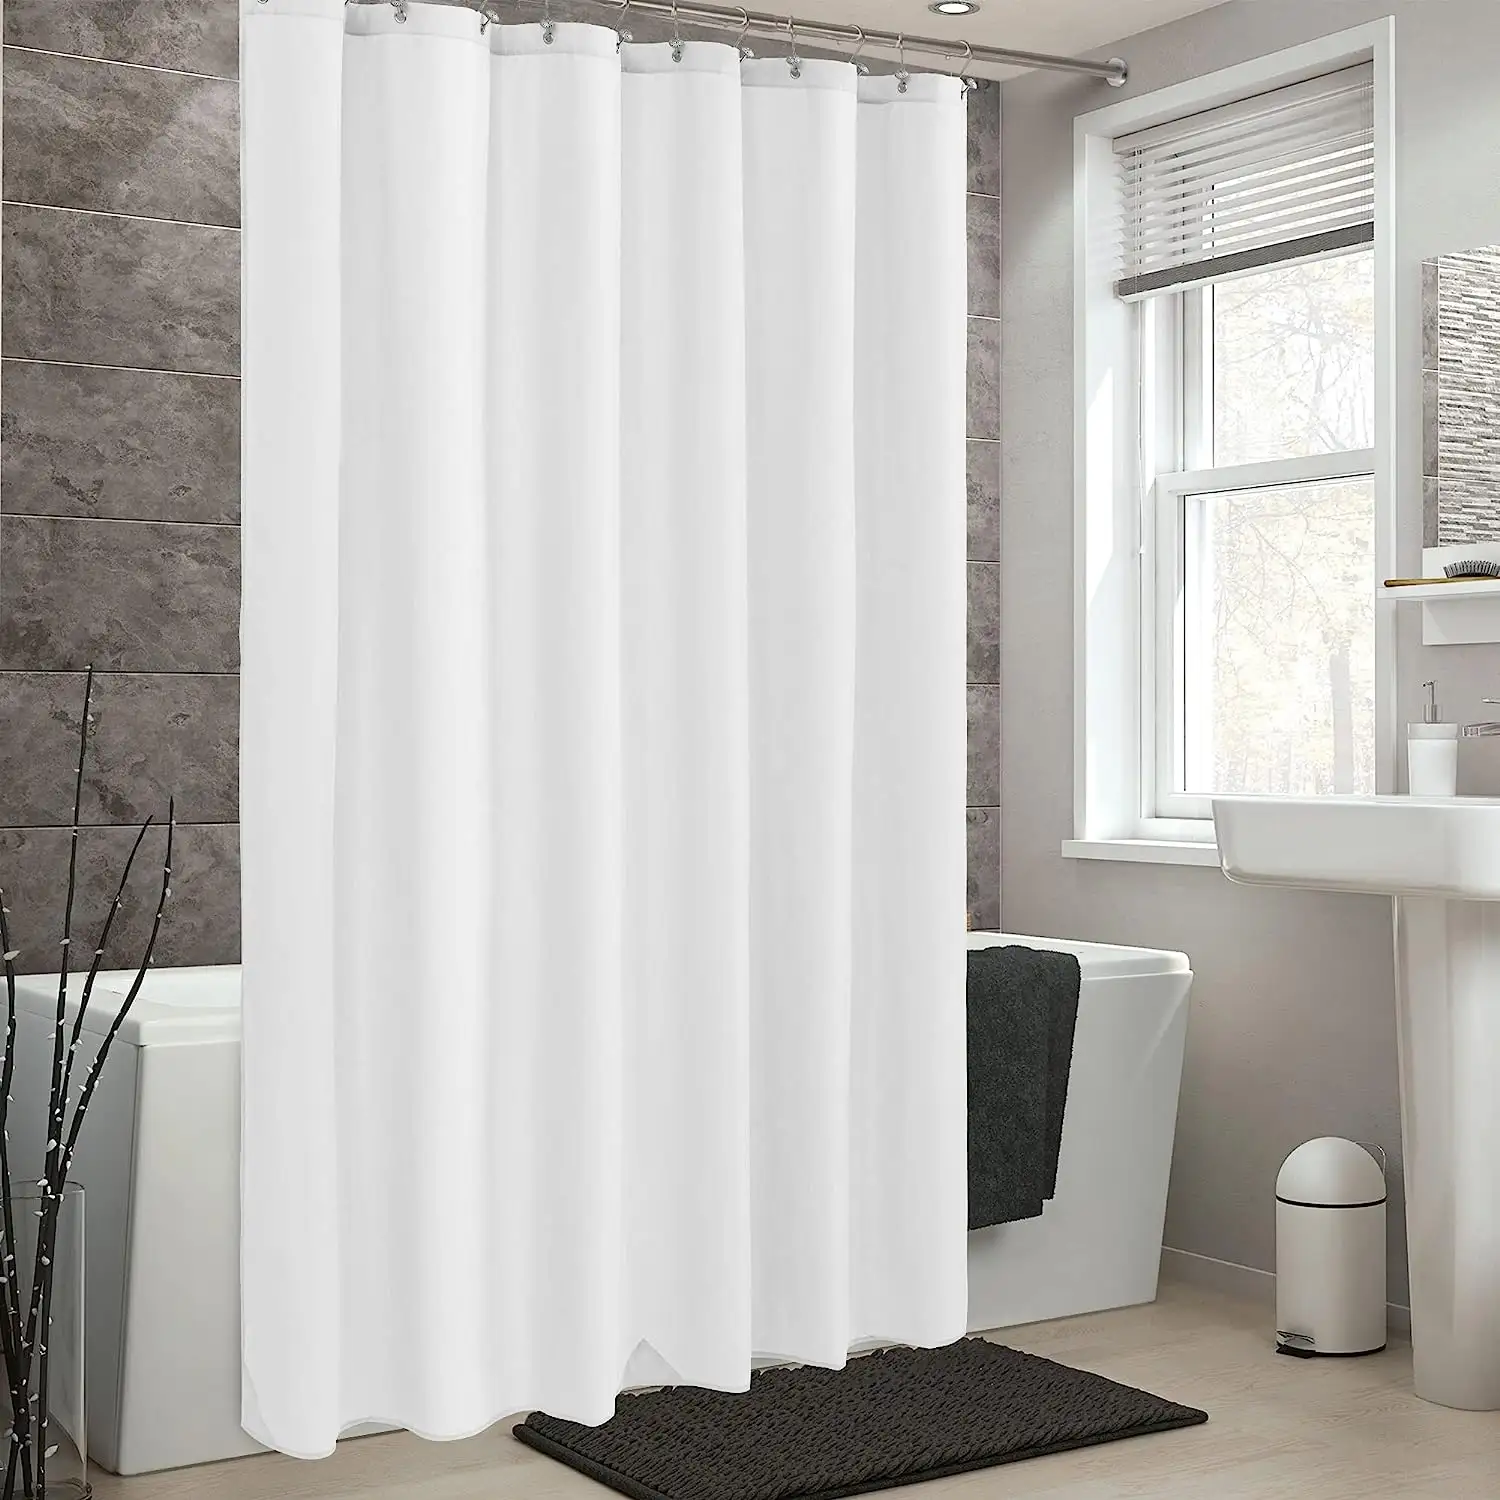 Waterproof White Polyester Shower Curtain Liner Soft Hotel Liner Light   Machine Washable Cloth Shower Curtain 72x72